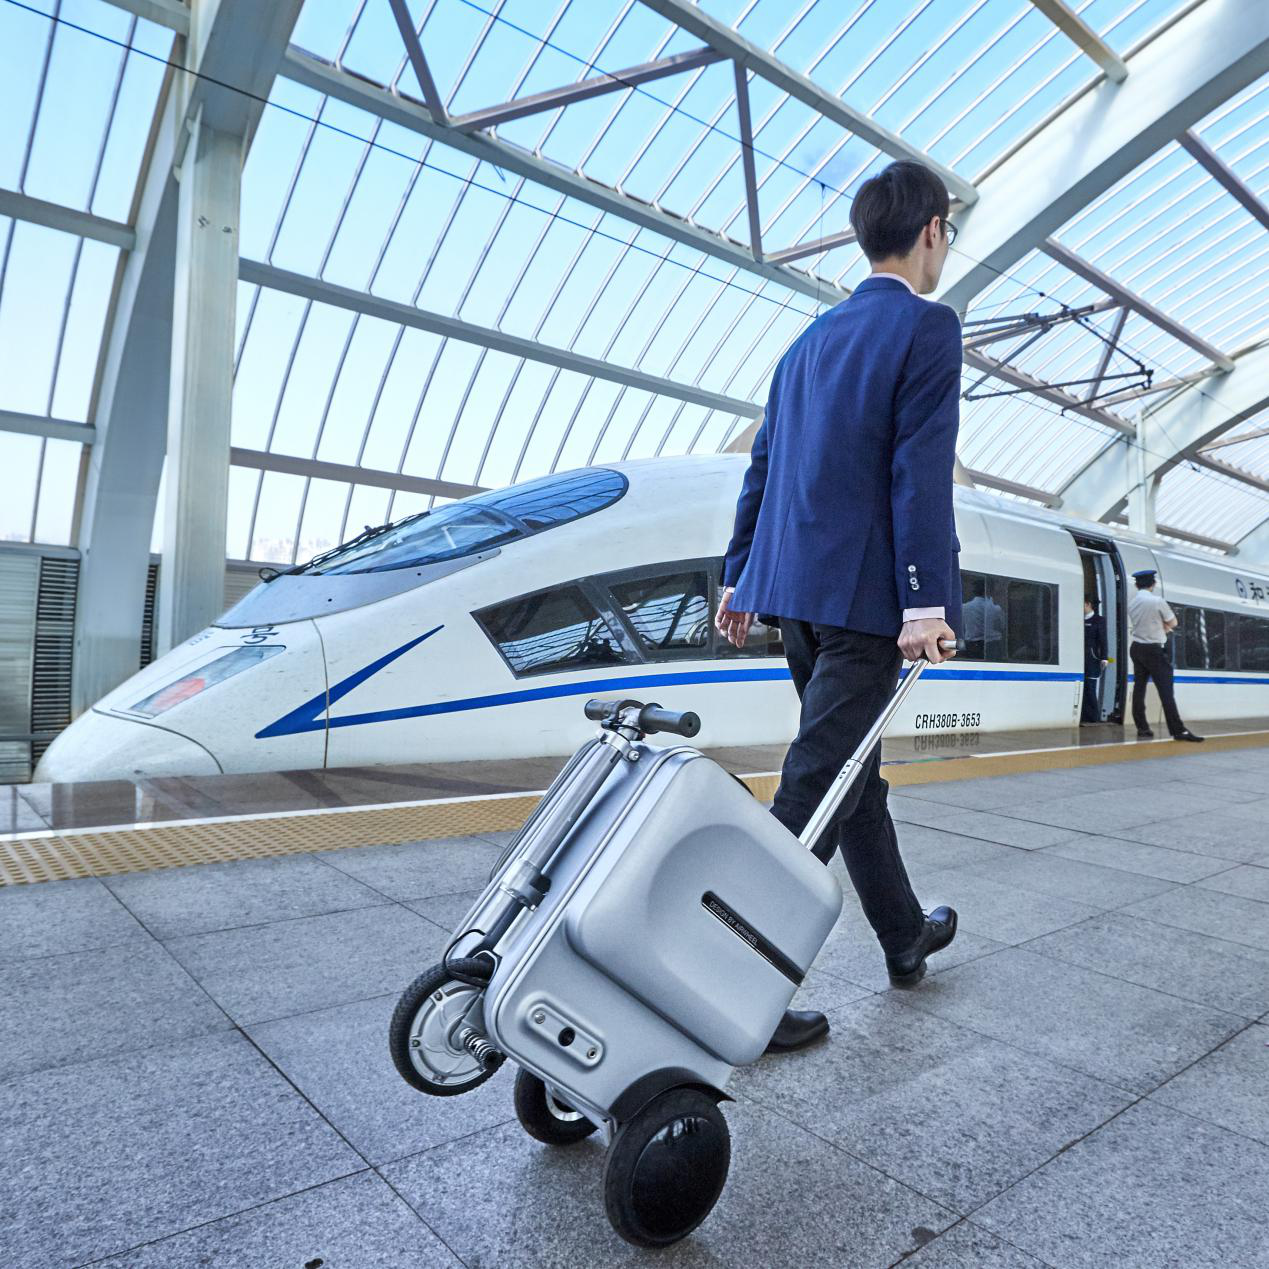 Airwheel rideable Luggage